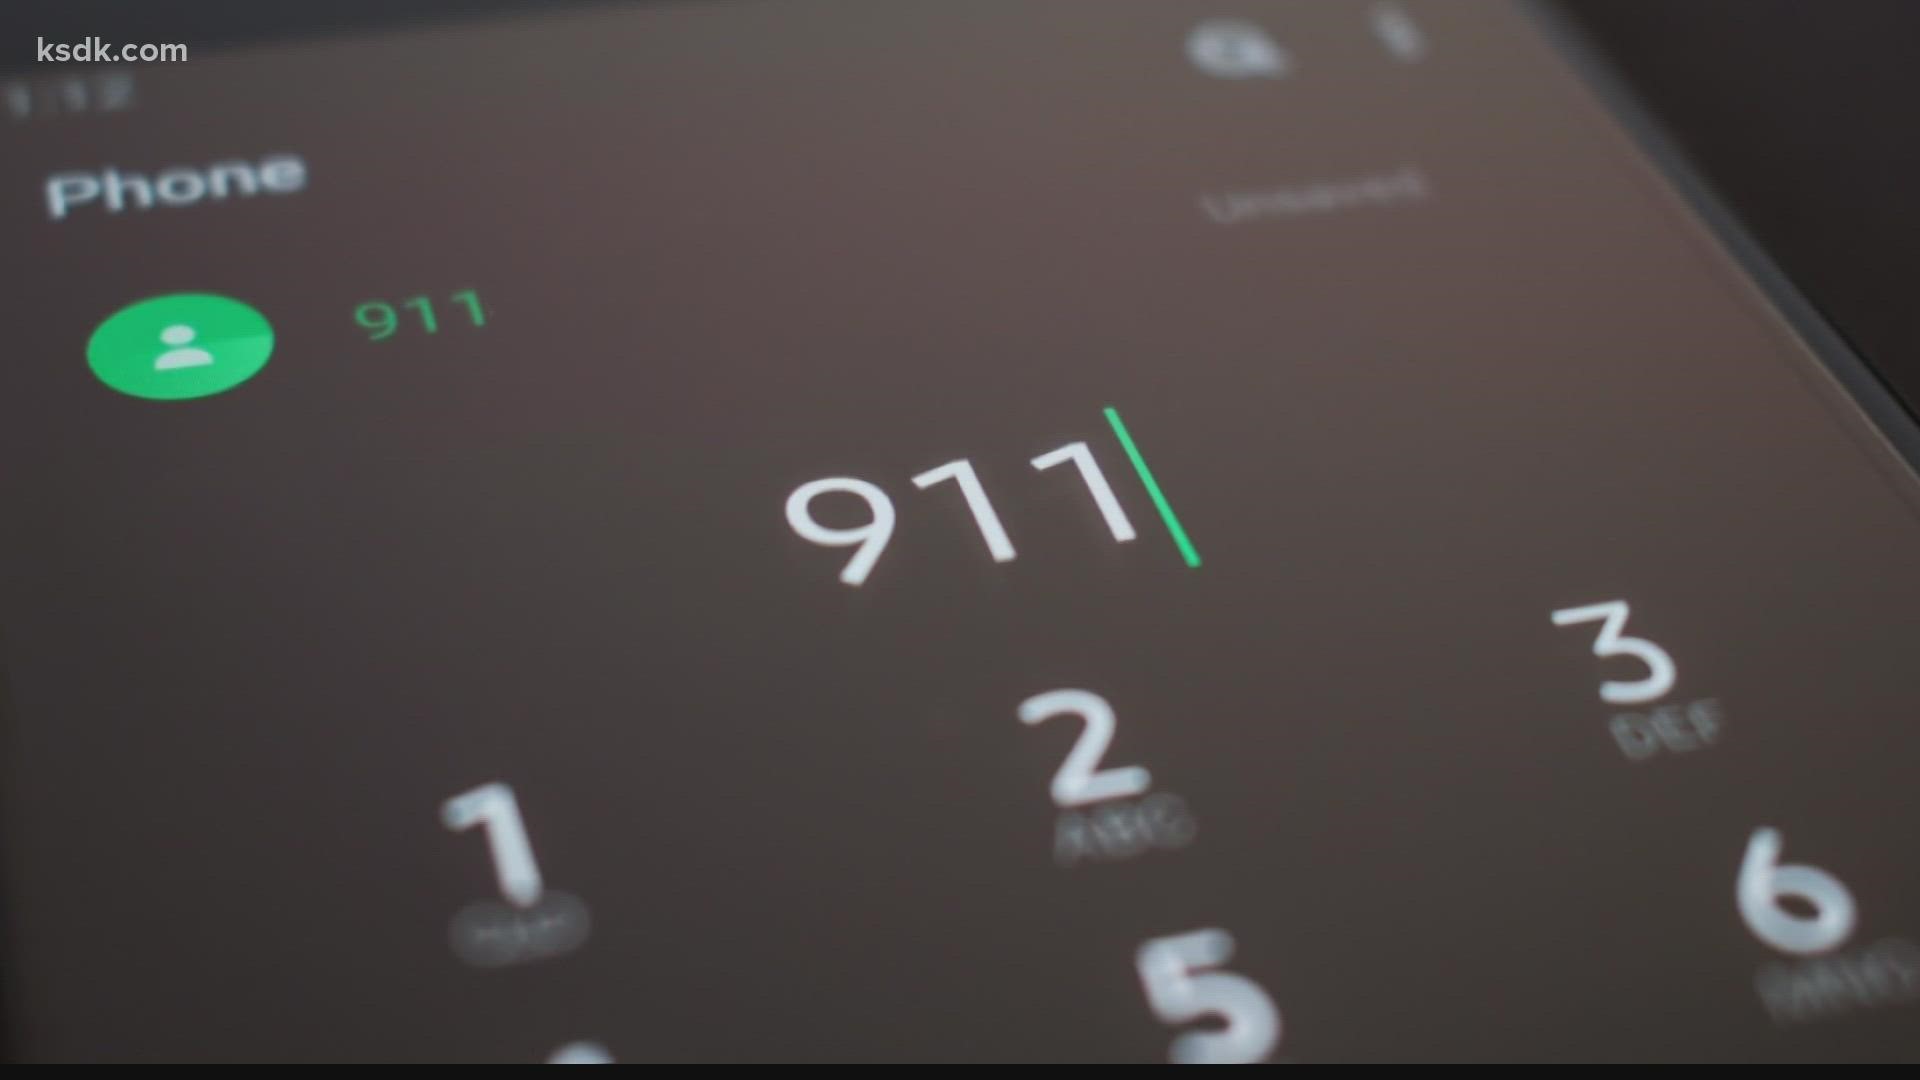 A national standard is to answer 90% of the calls in 10 seconds. As of February, 68.17% of St. Louis' 911 calls were answered in that time frame.